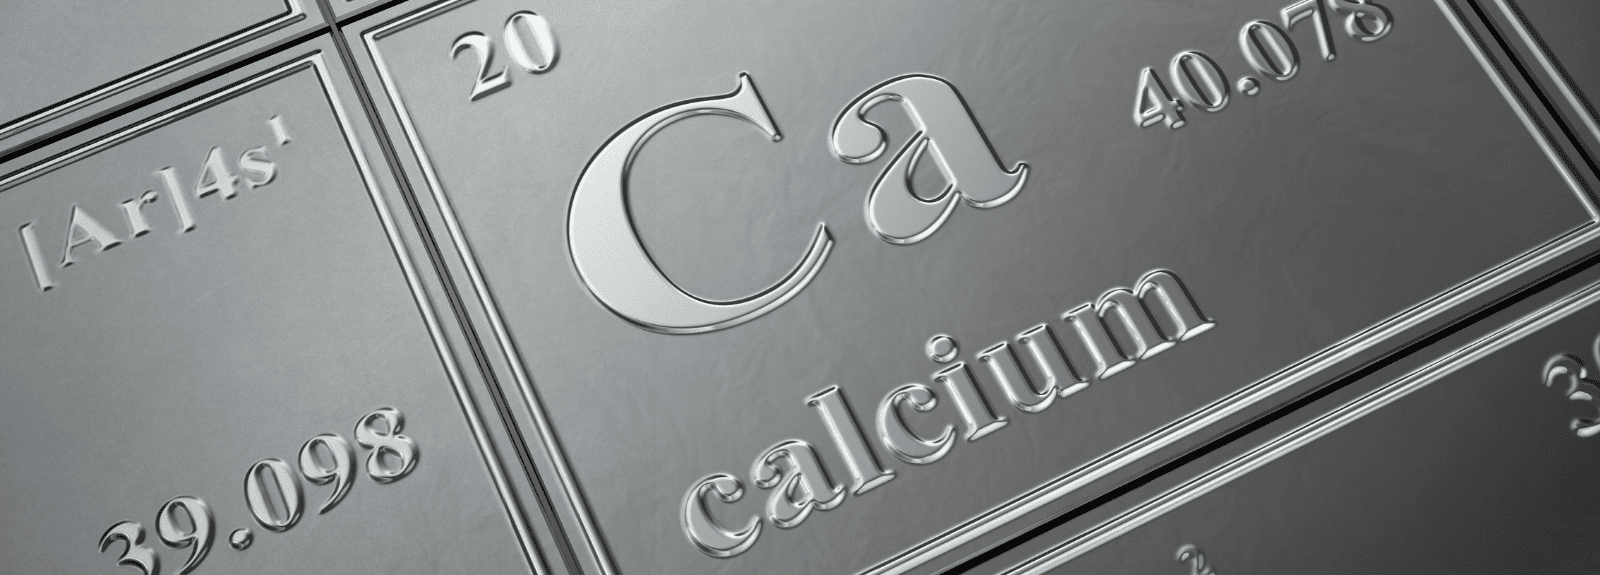 Calcium displayed on the periodic table